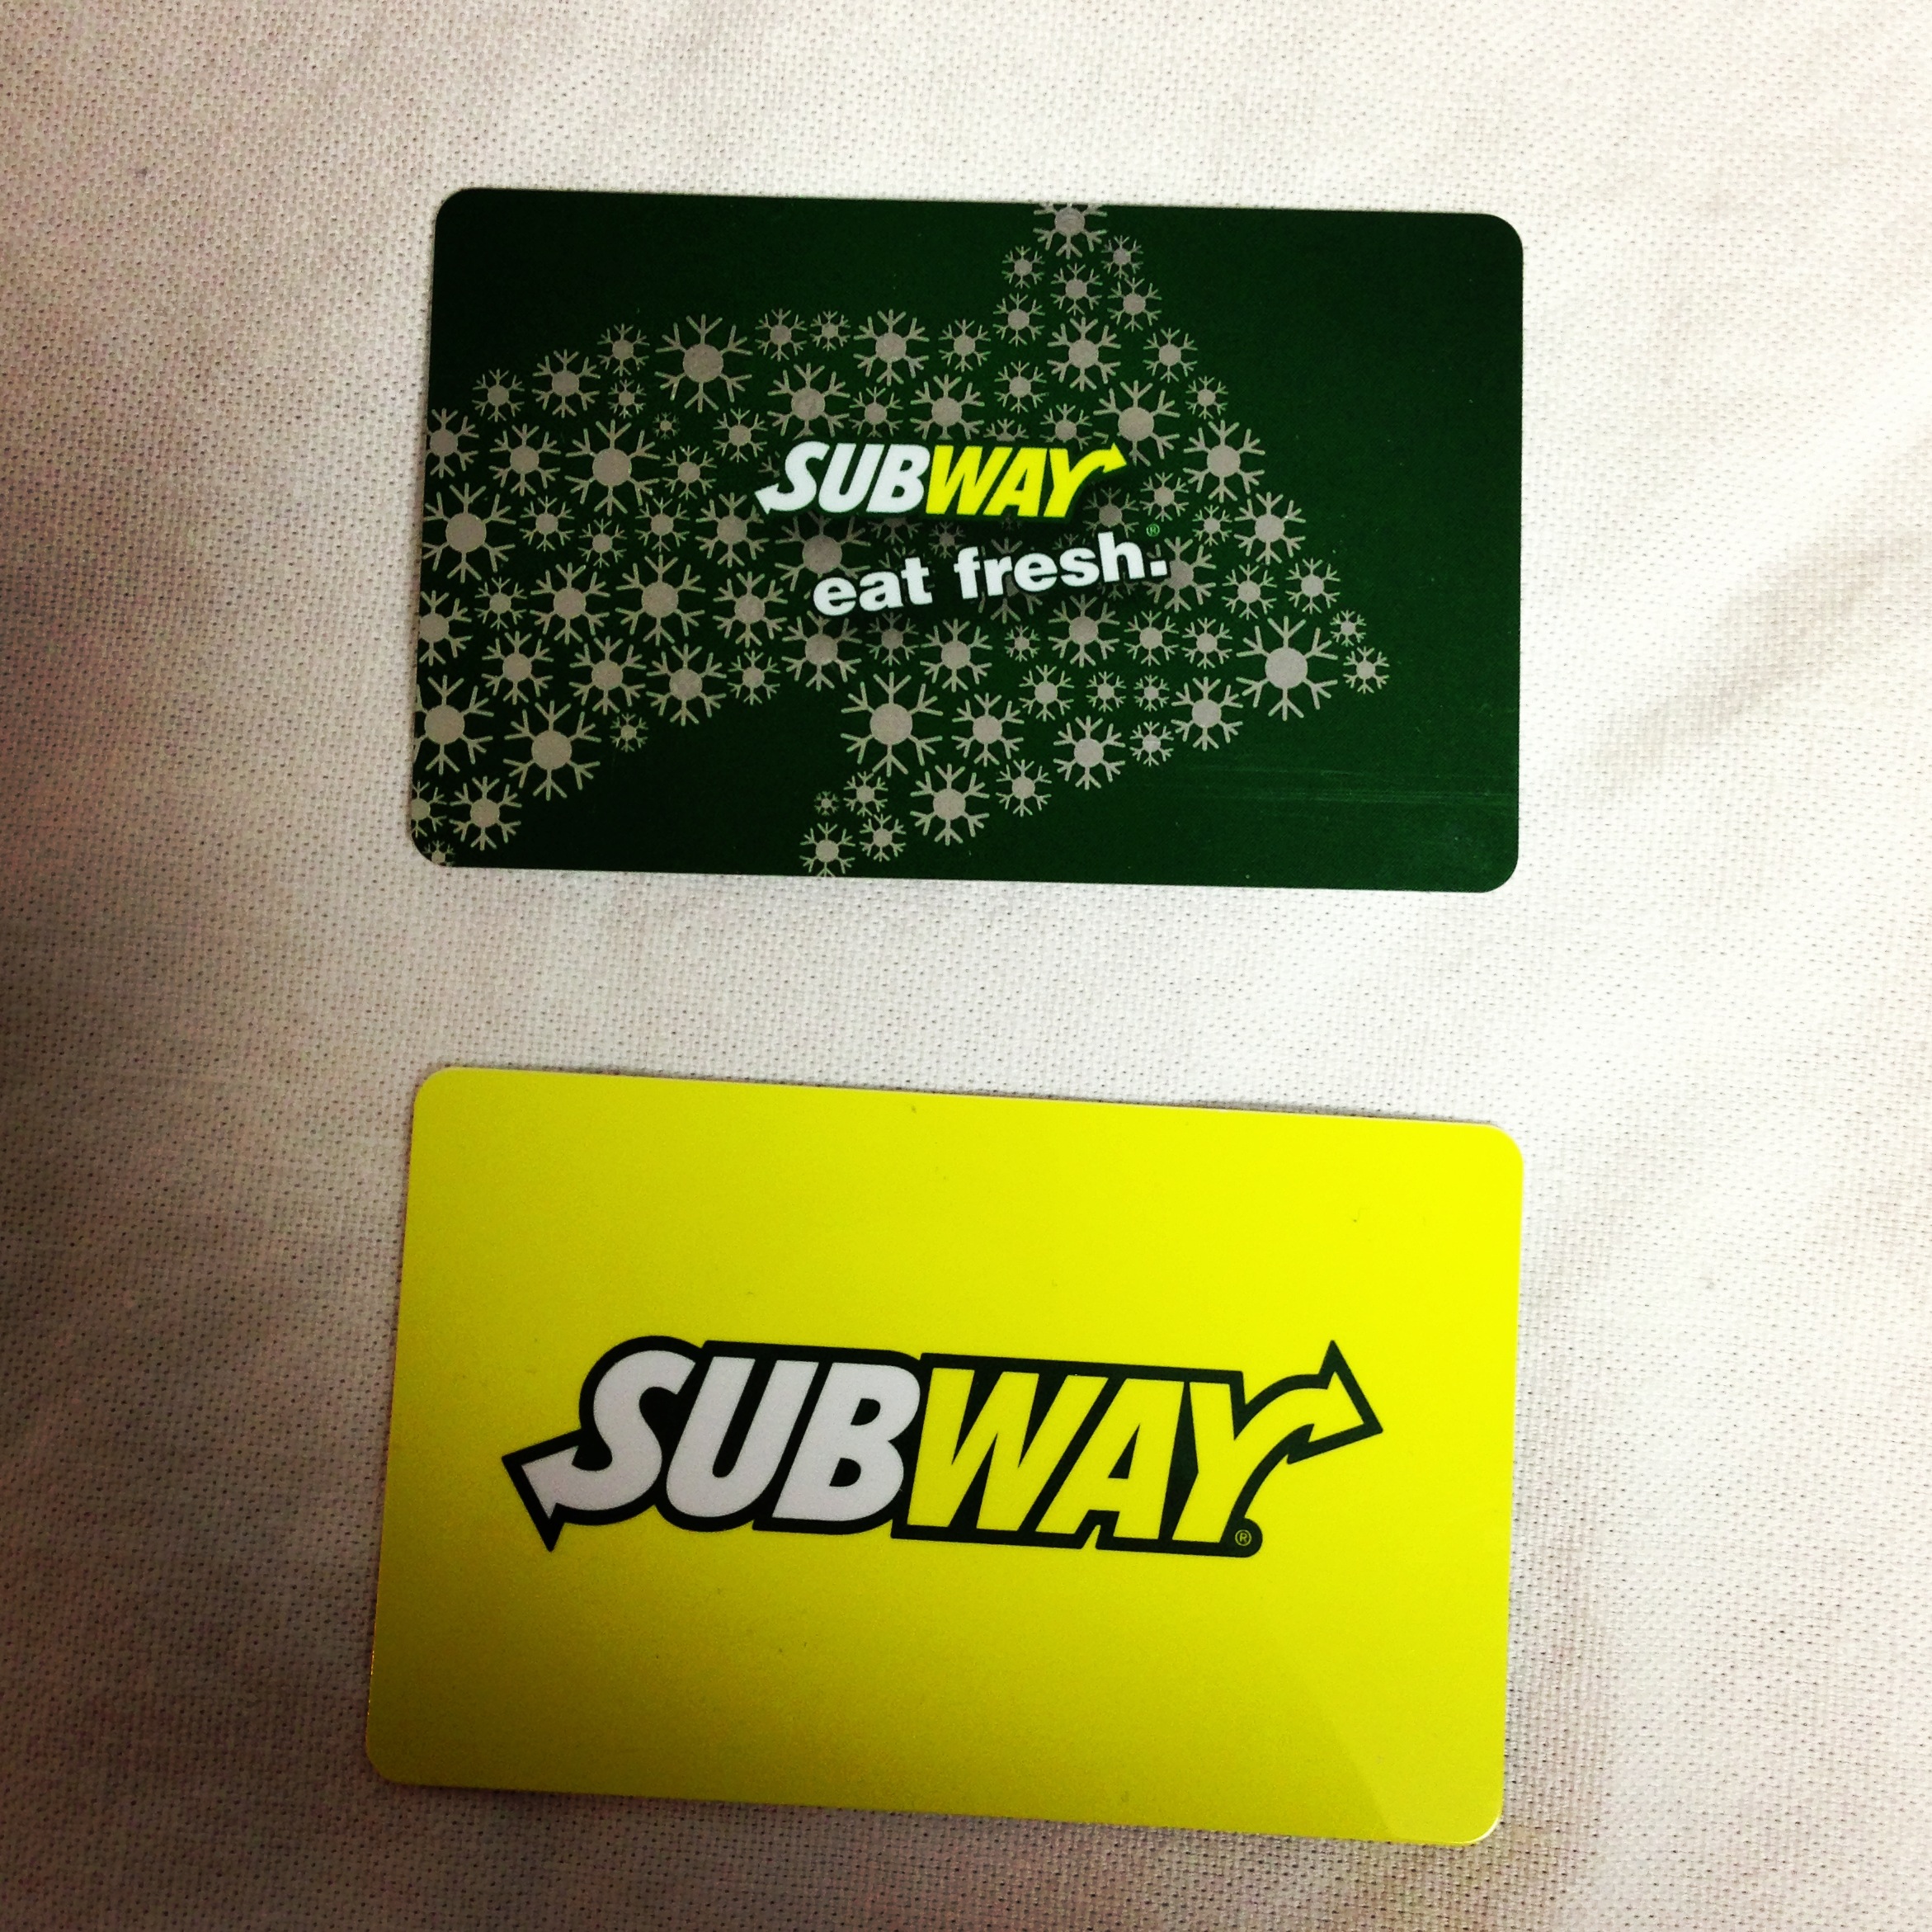 The Subway gift cards I got for Christmas.